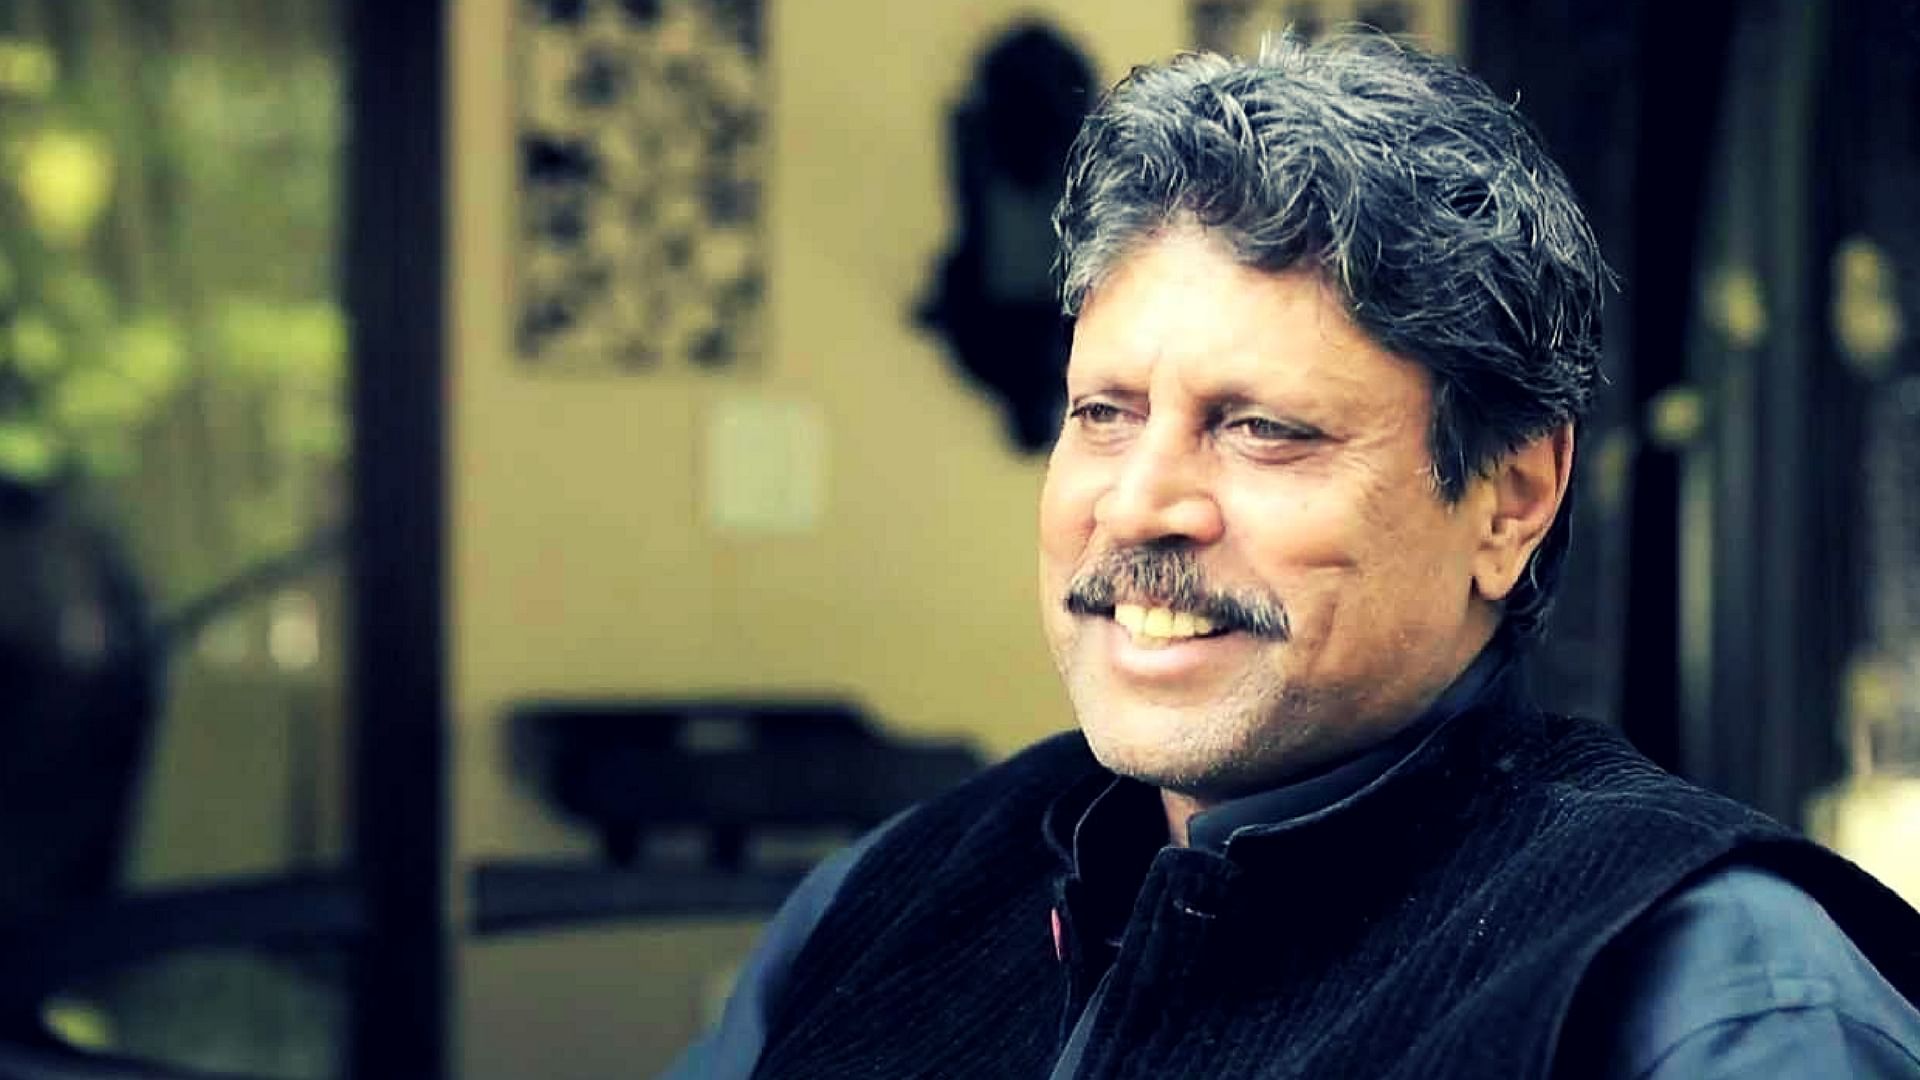 Kapil Dev urged the BCCI to take strong action against the U-19 cricketers to set an example.